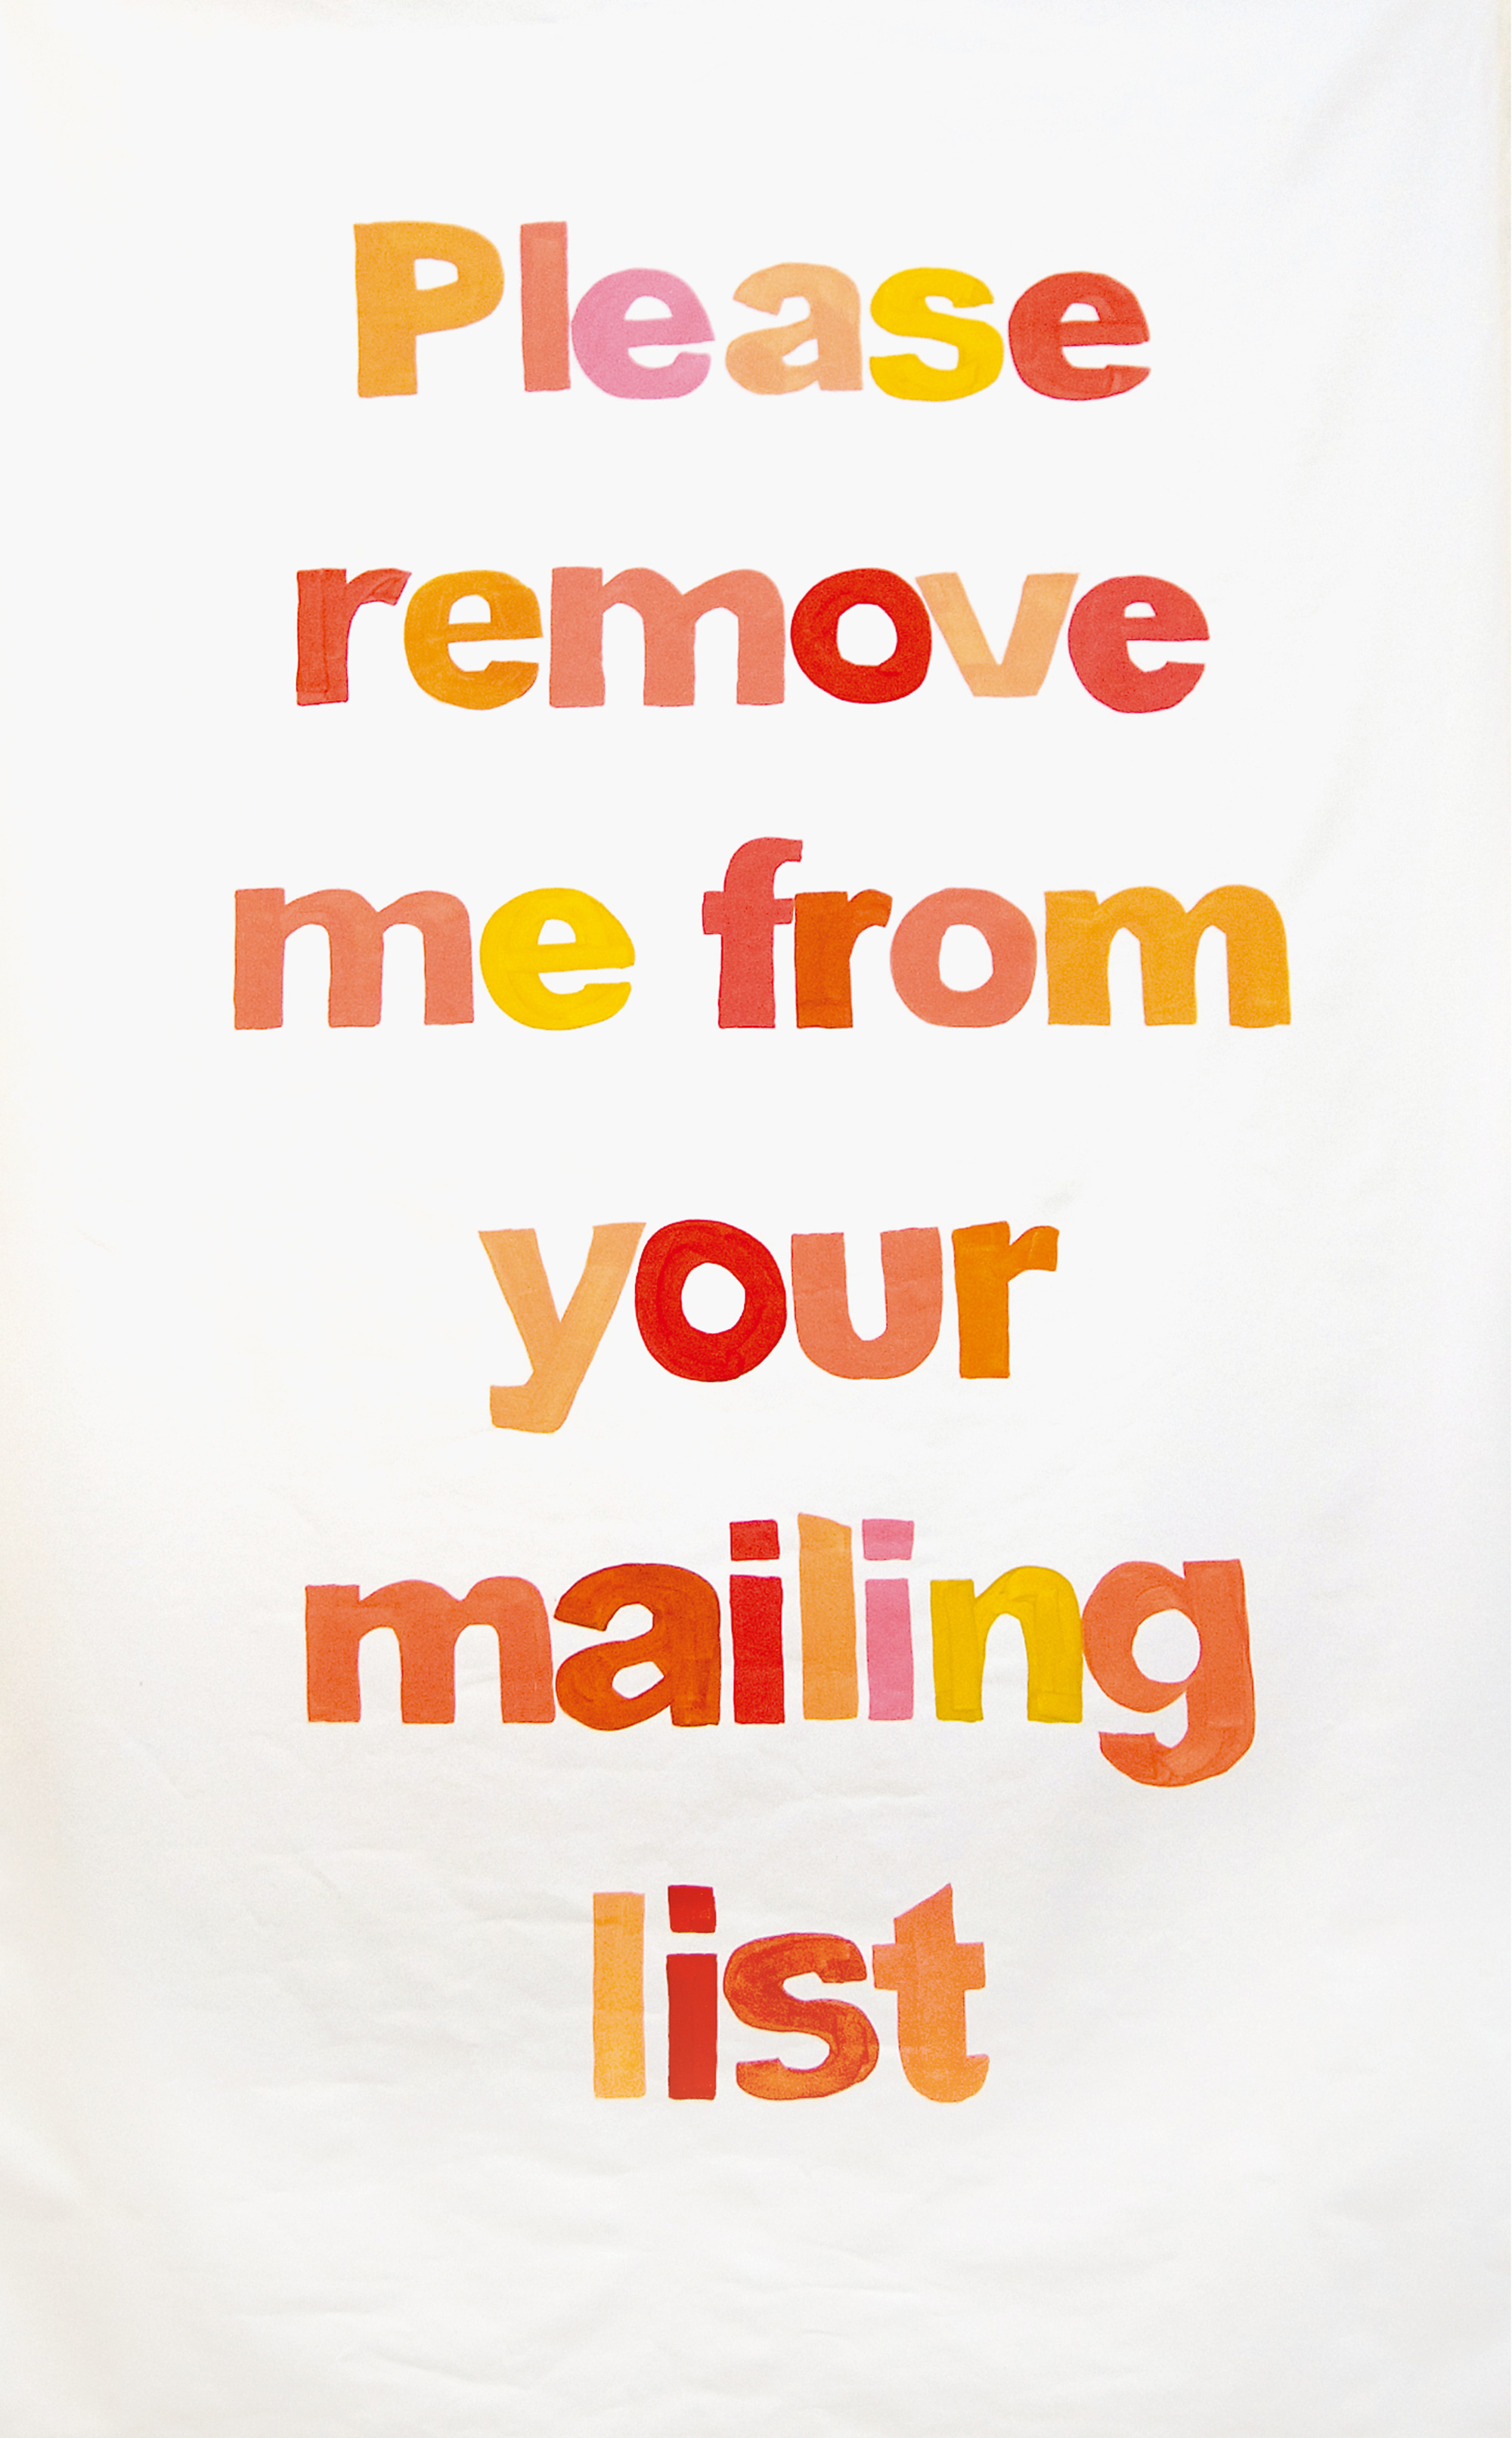 A photograph of the artist project by Annika Ström that reads “Please remove me from your mailing list.” 